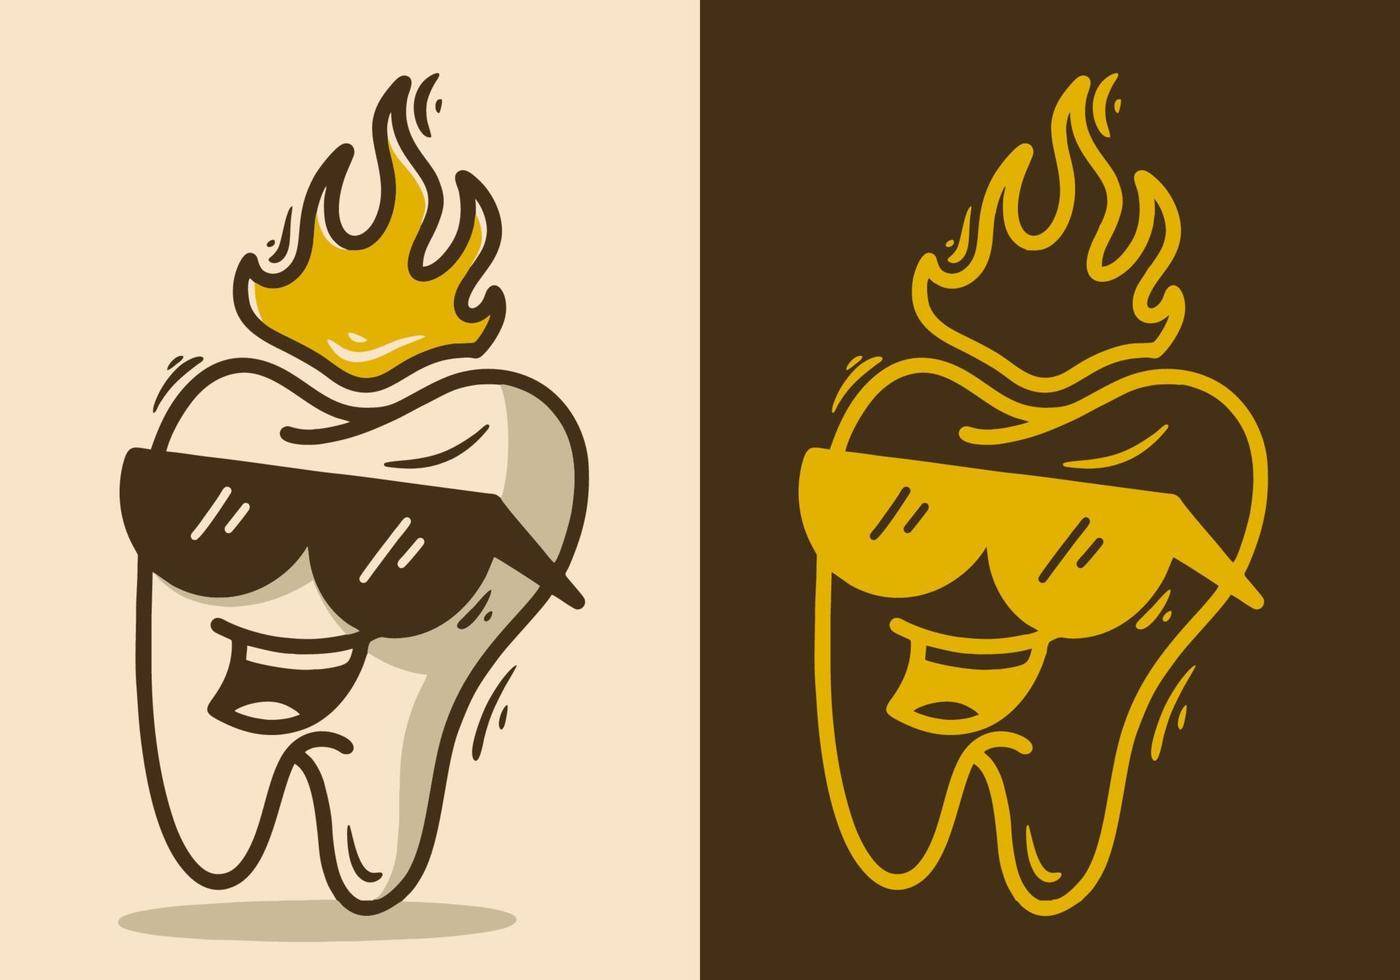 The tooth mascot character with smiling face wearing a glasses vector